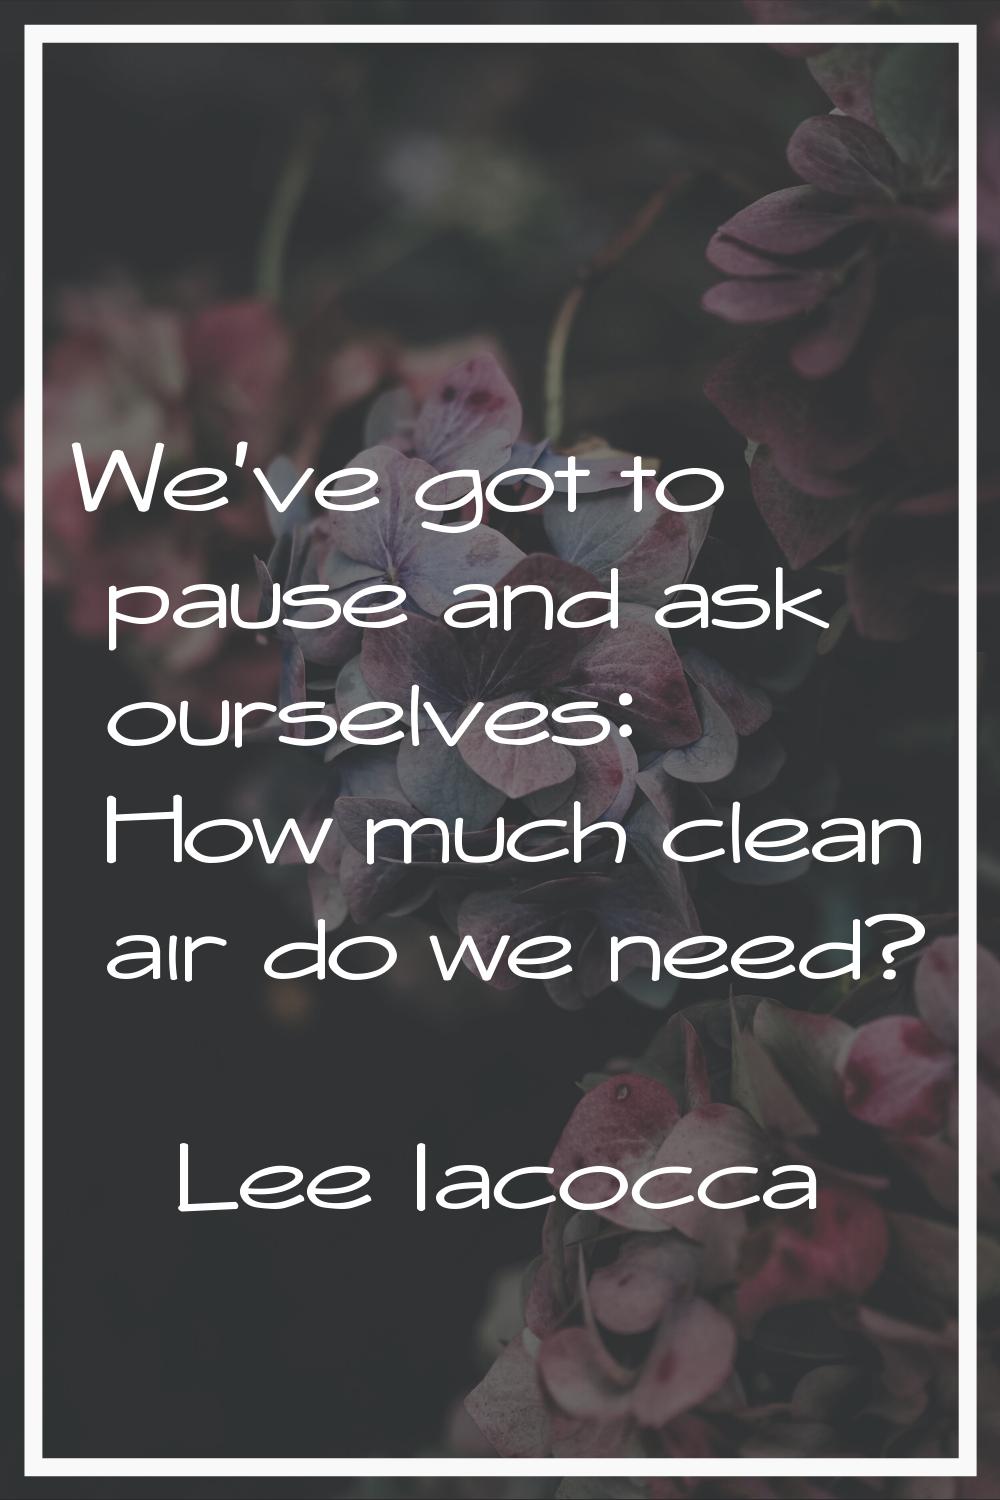 We've got to pause and ask ourselves: How much clean air do we need?